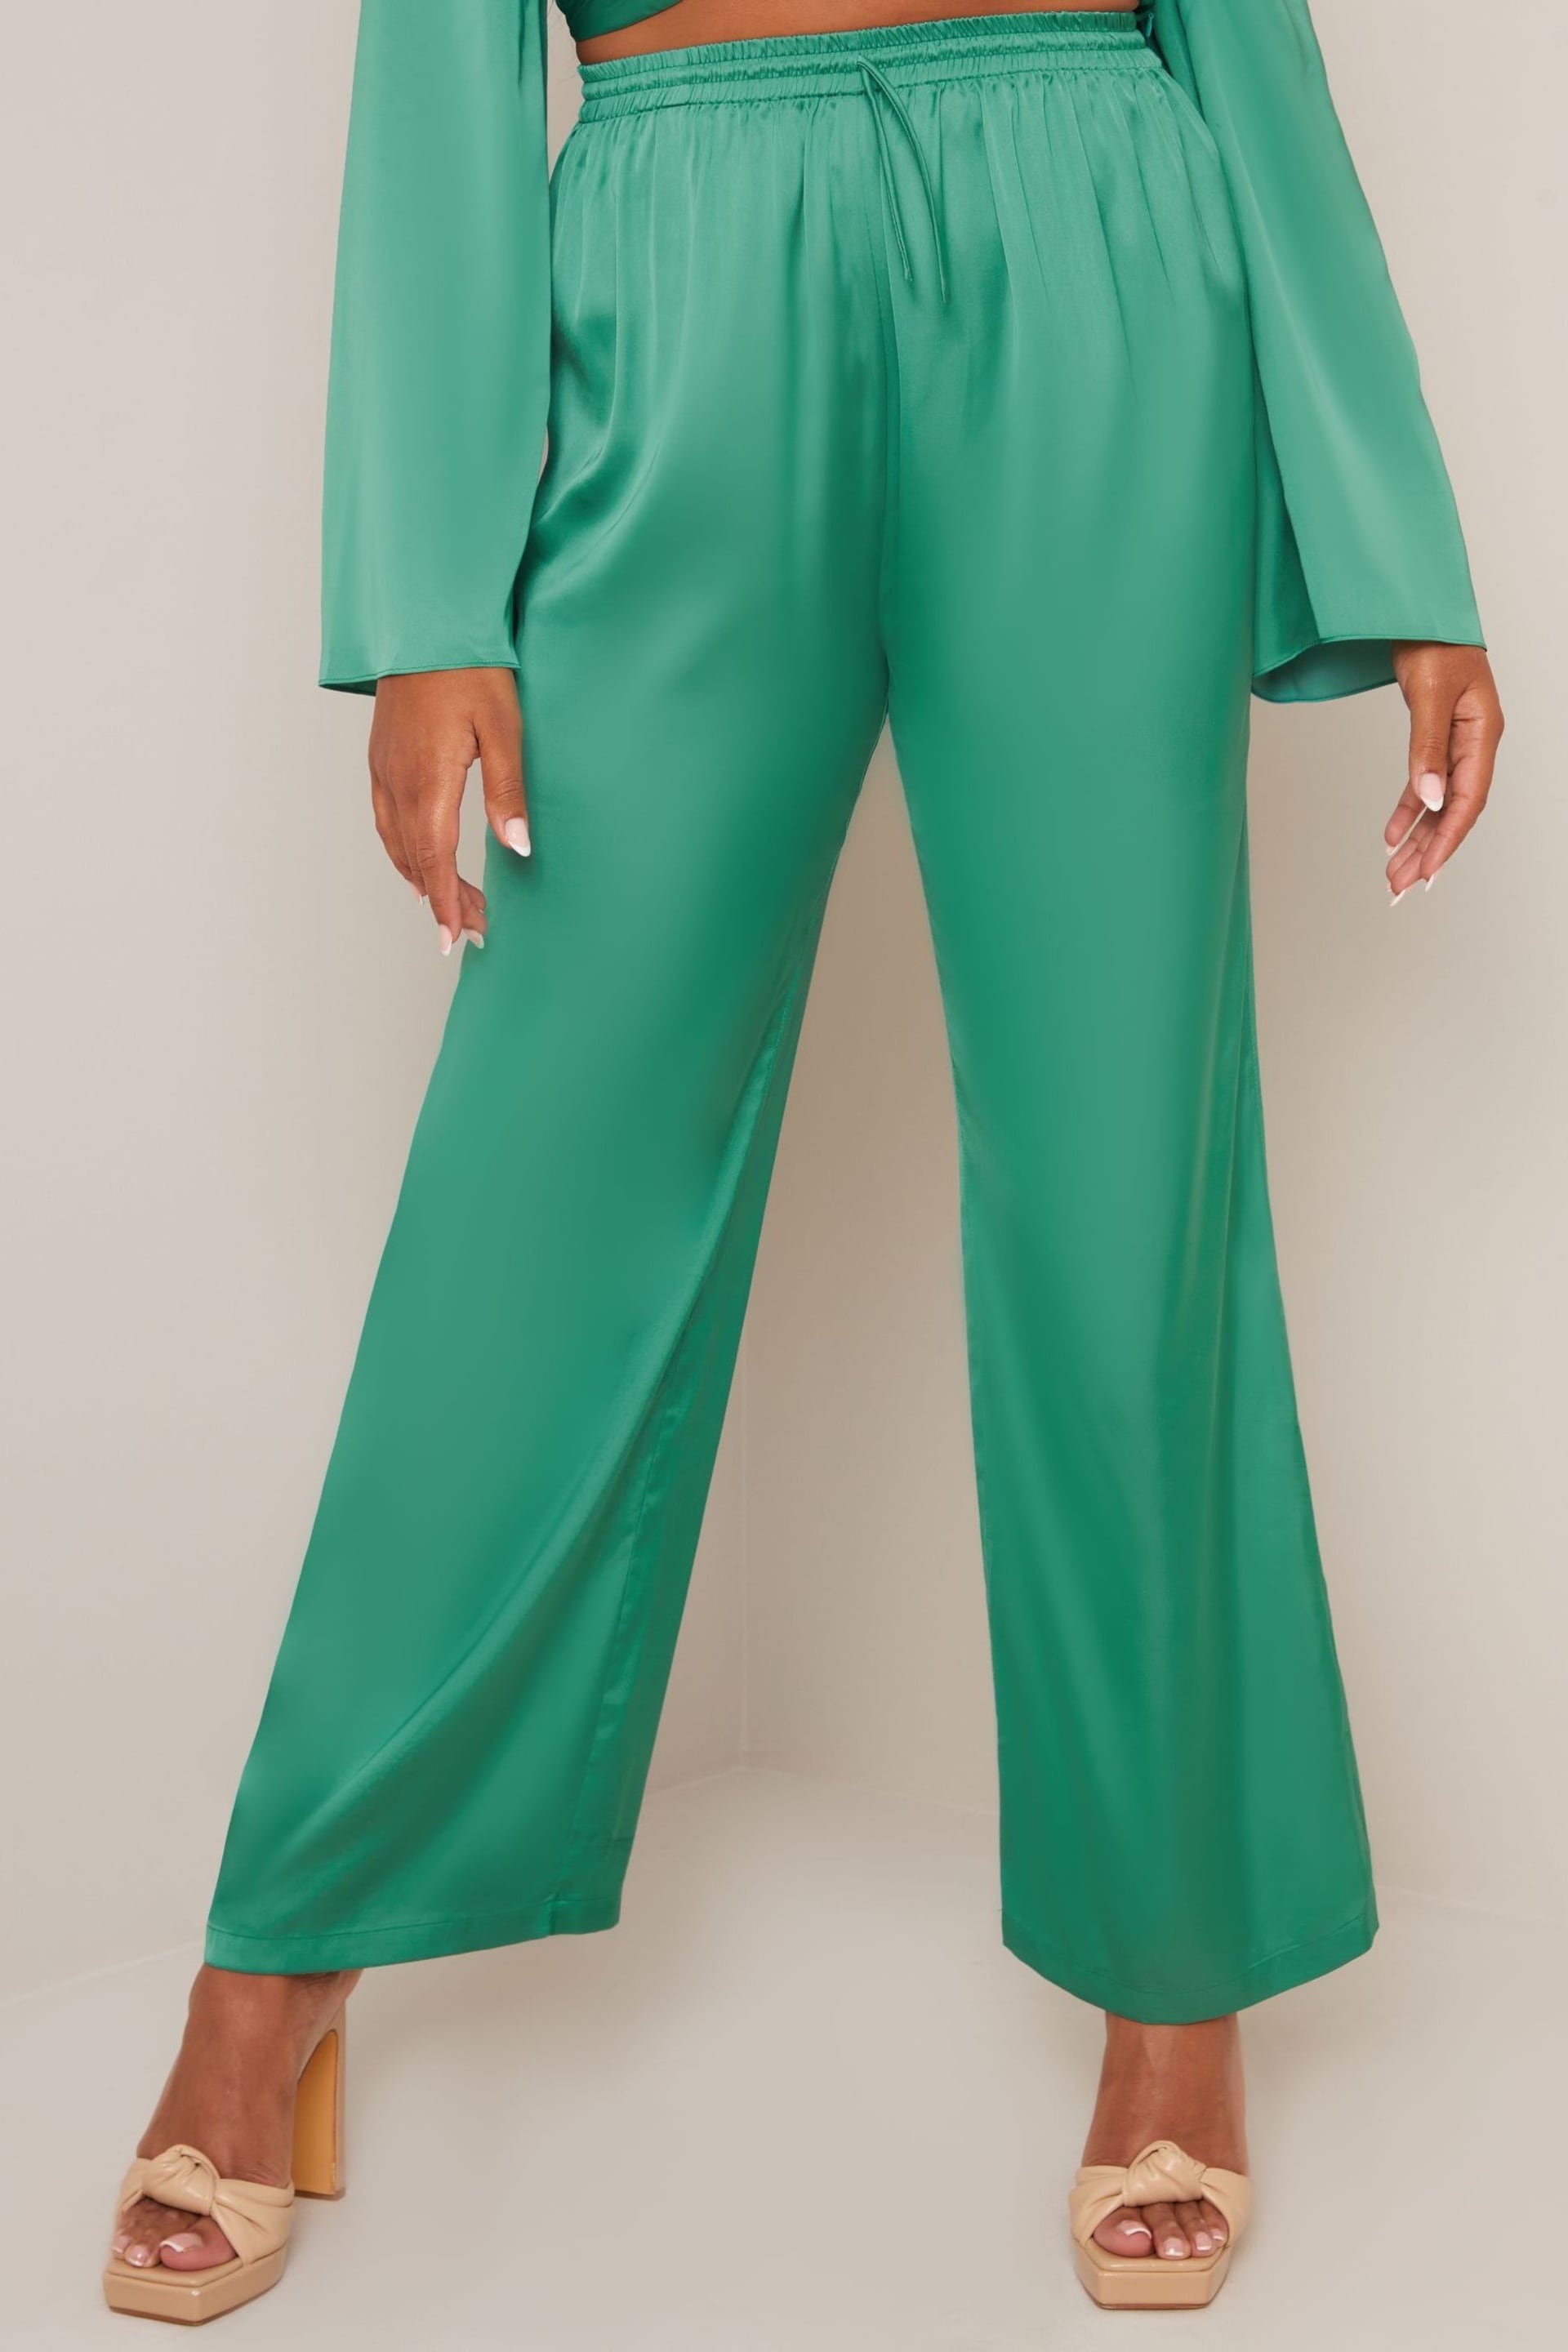 Chi Chi London Green Satin Wide Leg Elasticated Waist Trousers - Image 9 of 10